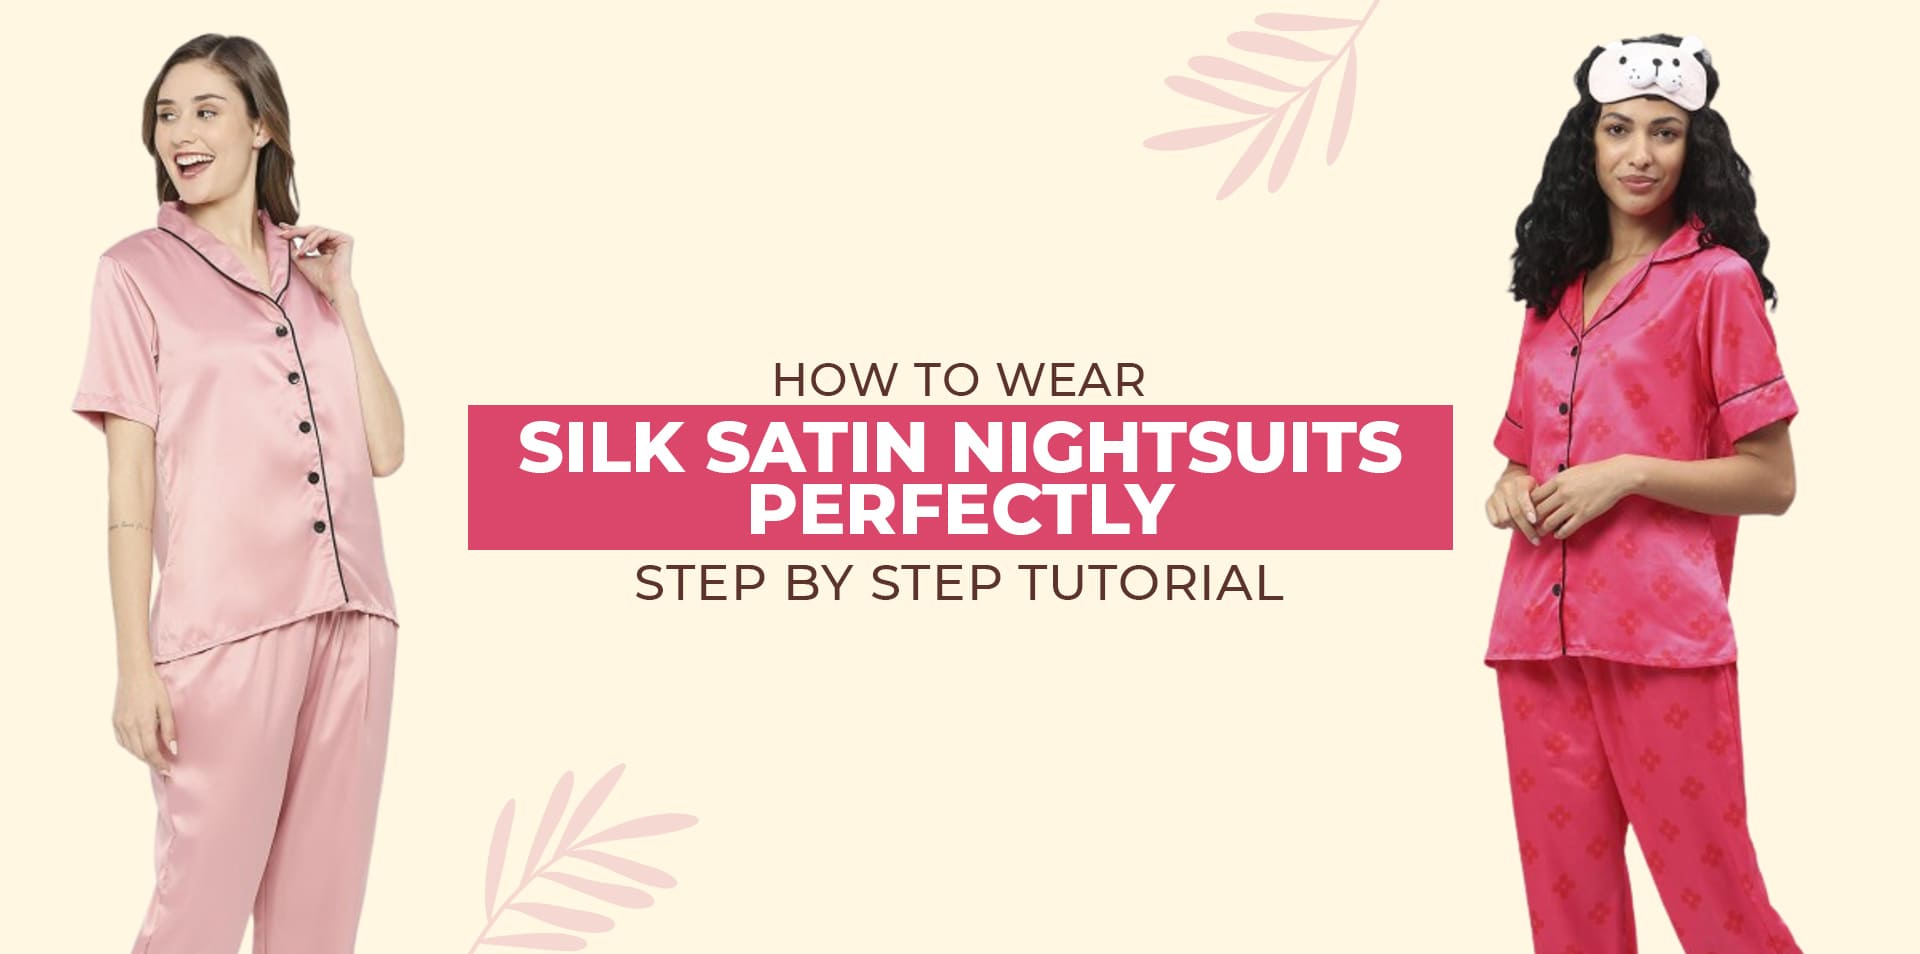 How to Wear Silk Satin Nightsuits Perfectly: A Step-By-Step Tutorial